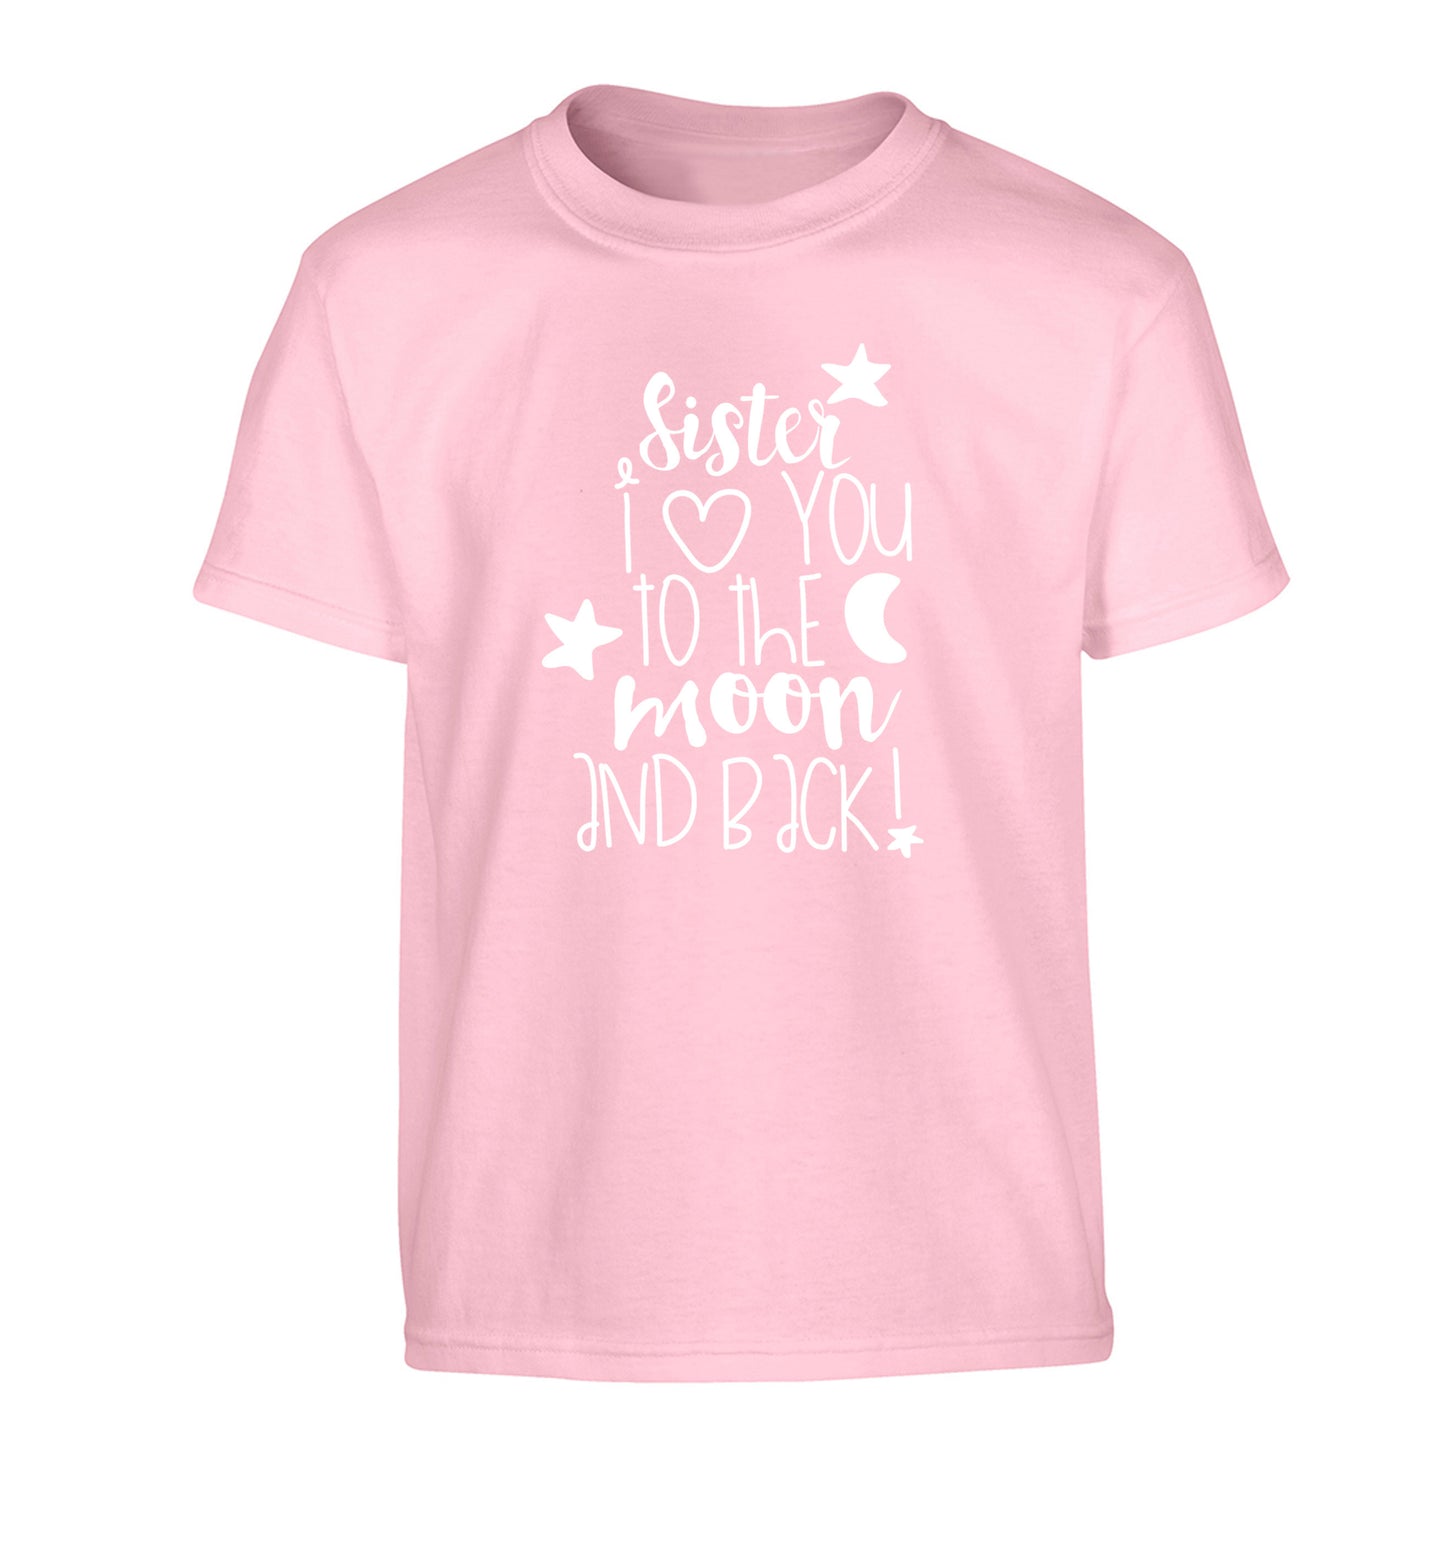 Sister I love you to the moon and back Children's light pink Tshirt 12-14 Years